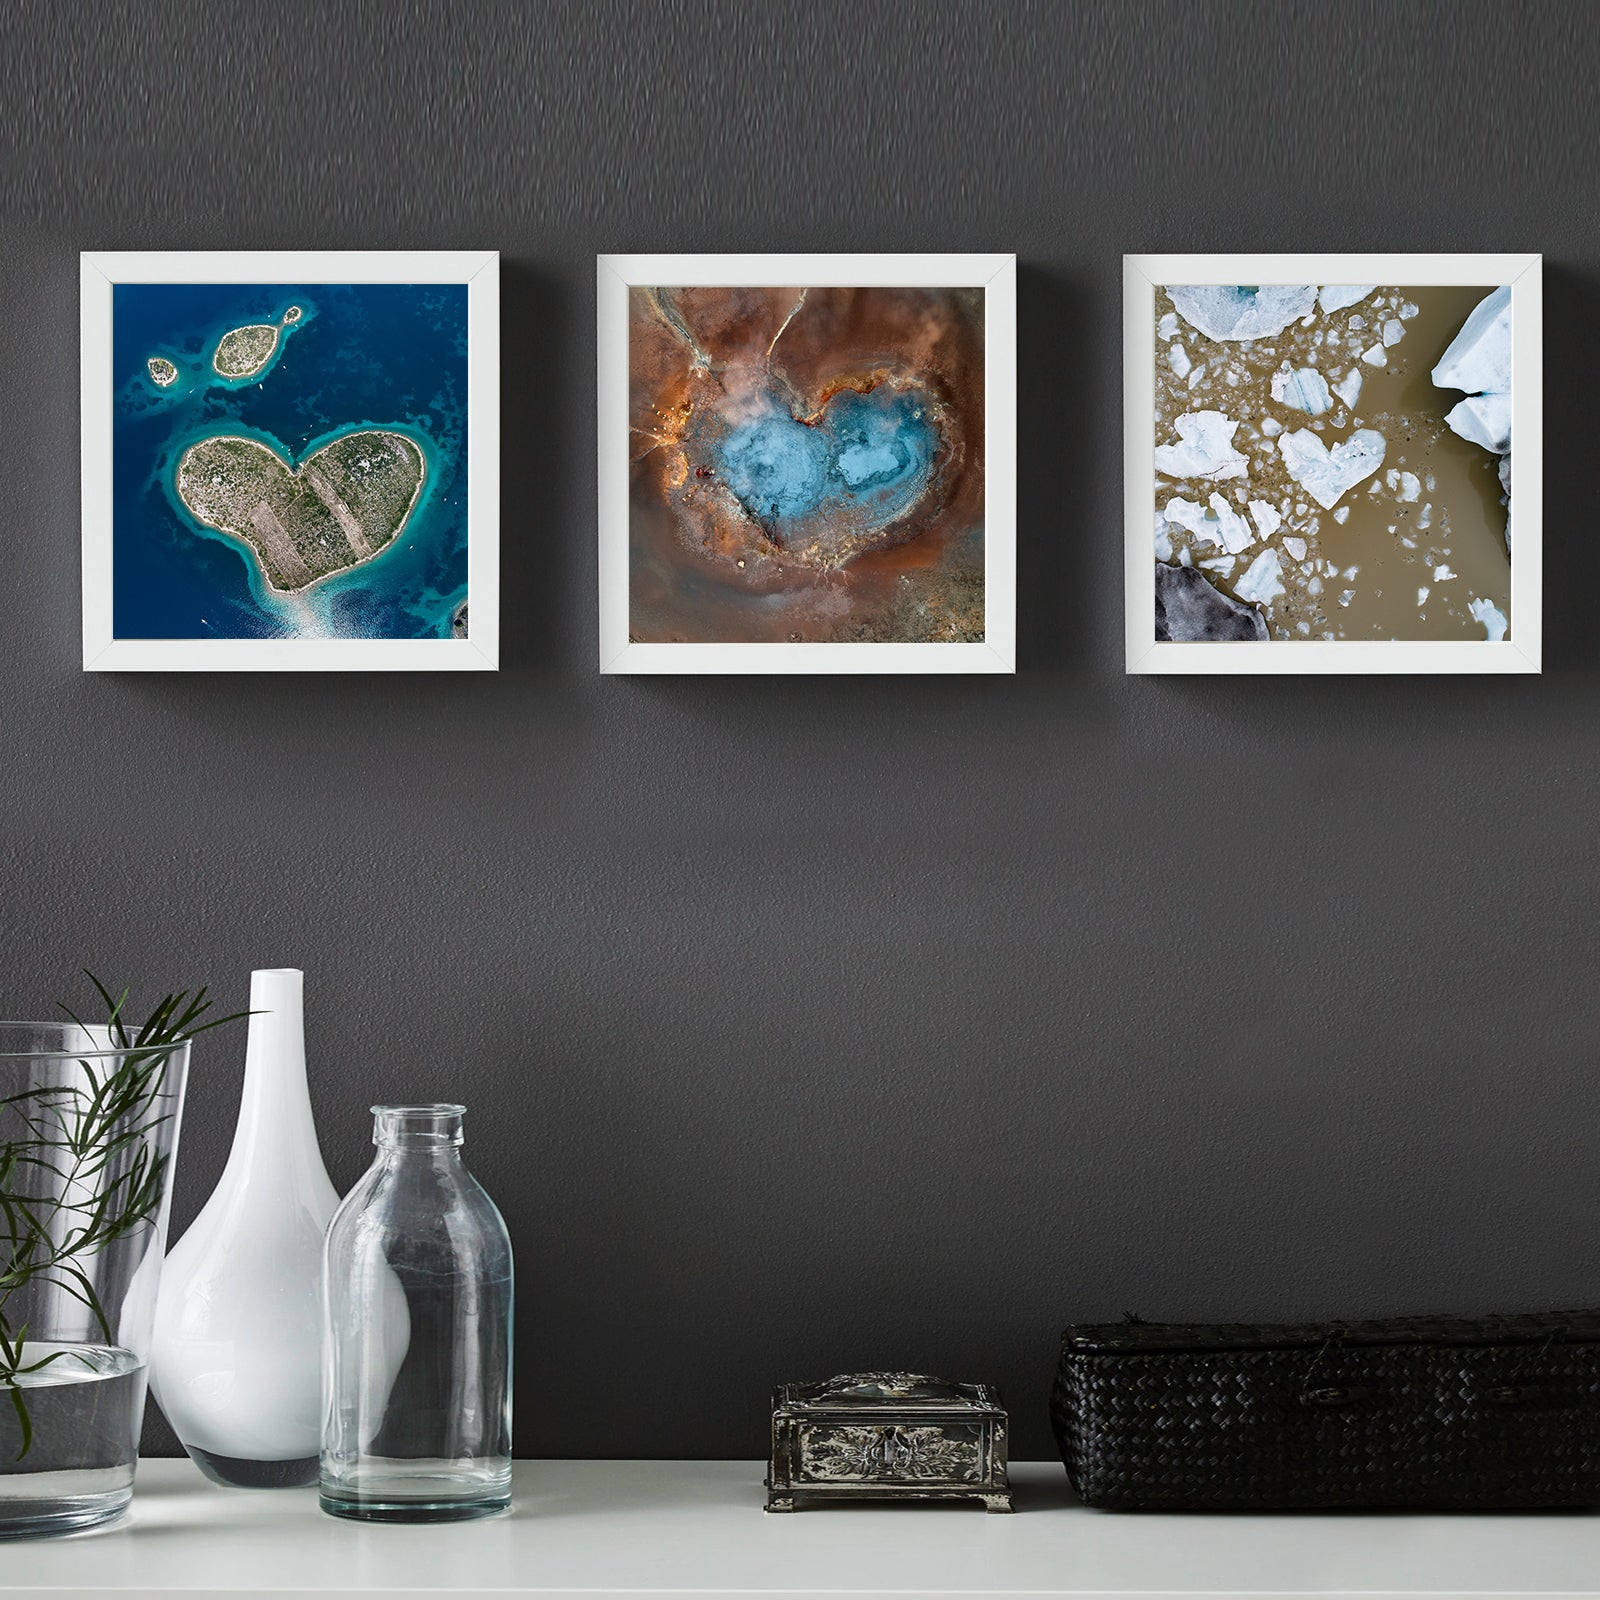 Heart shaped collection - Three-piece collection, photo art print